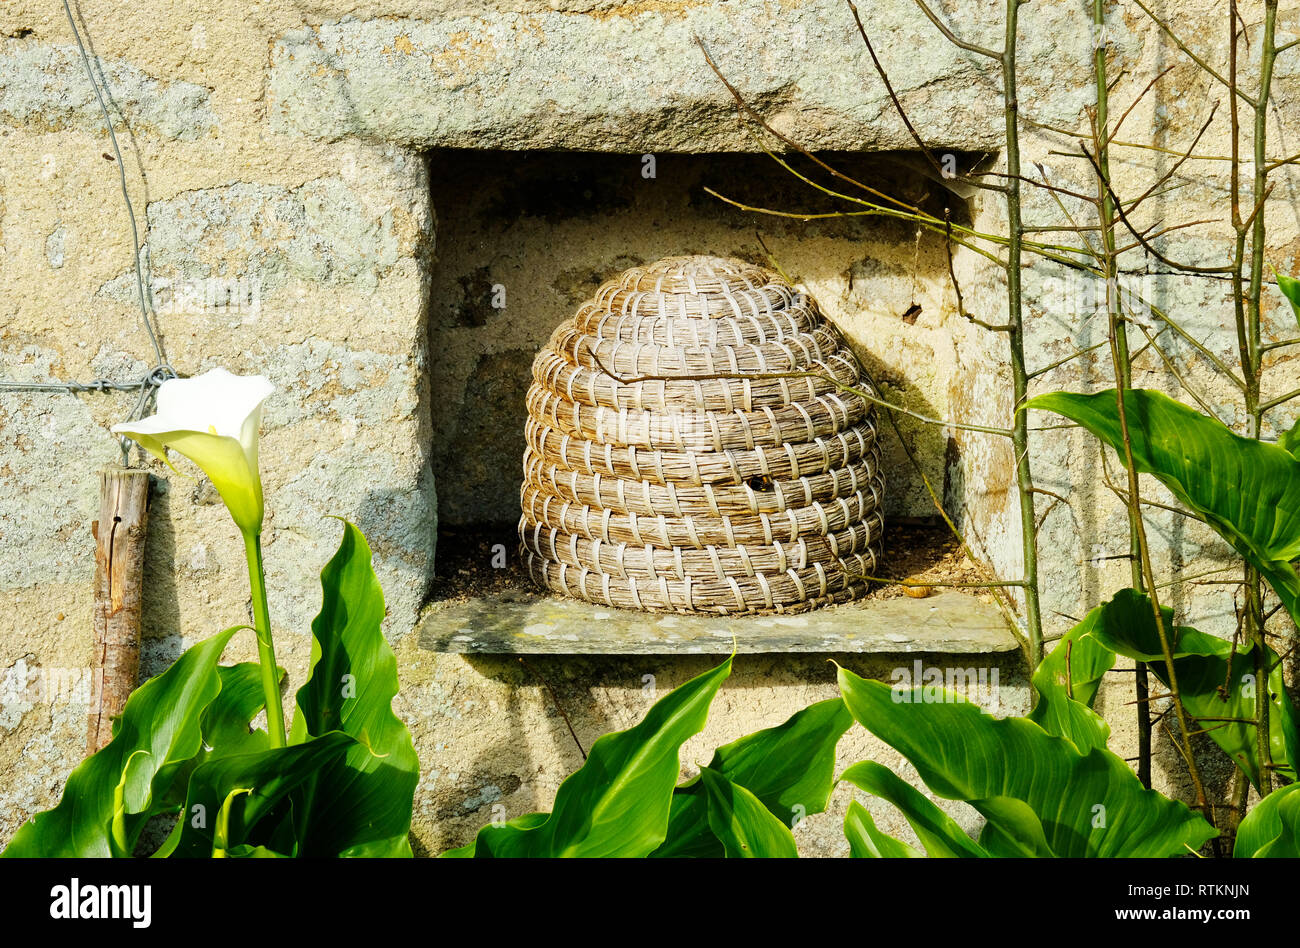 A traditional beehive or skep in an English winter country garden - John Gollop Stock Photo